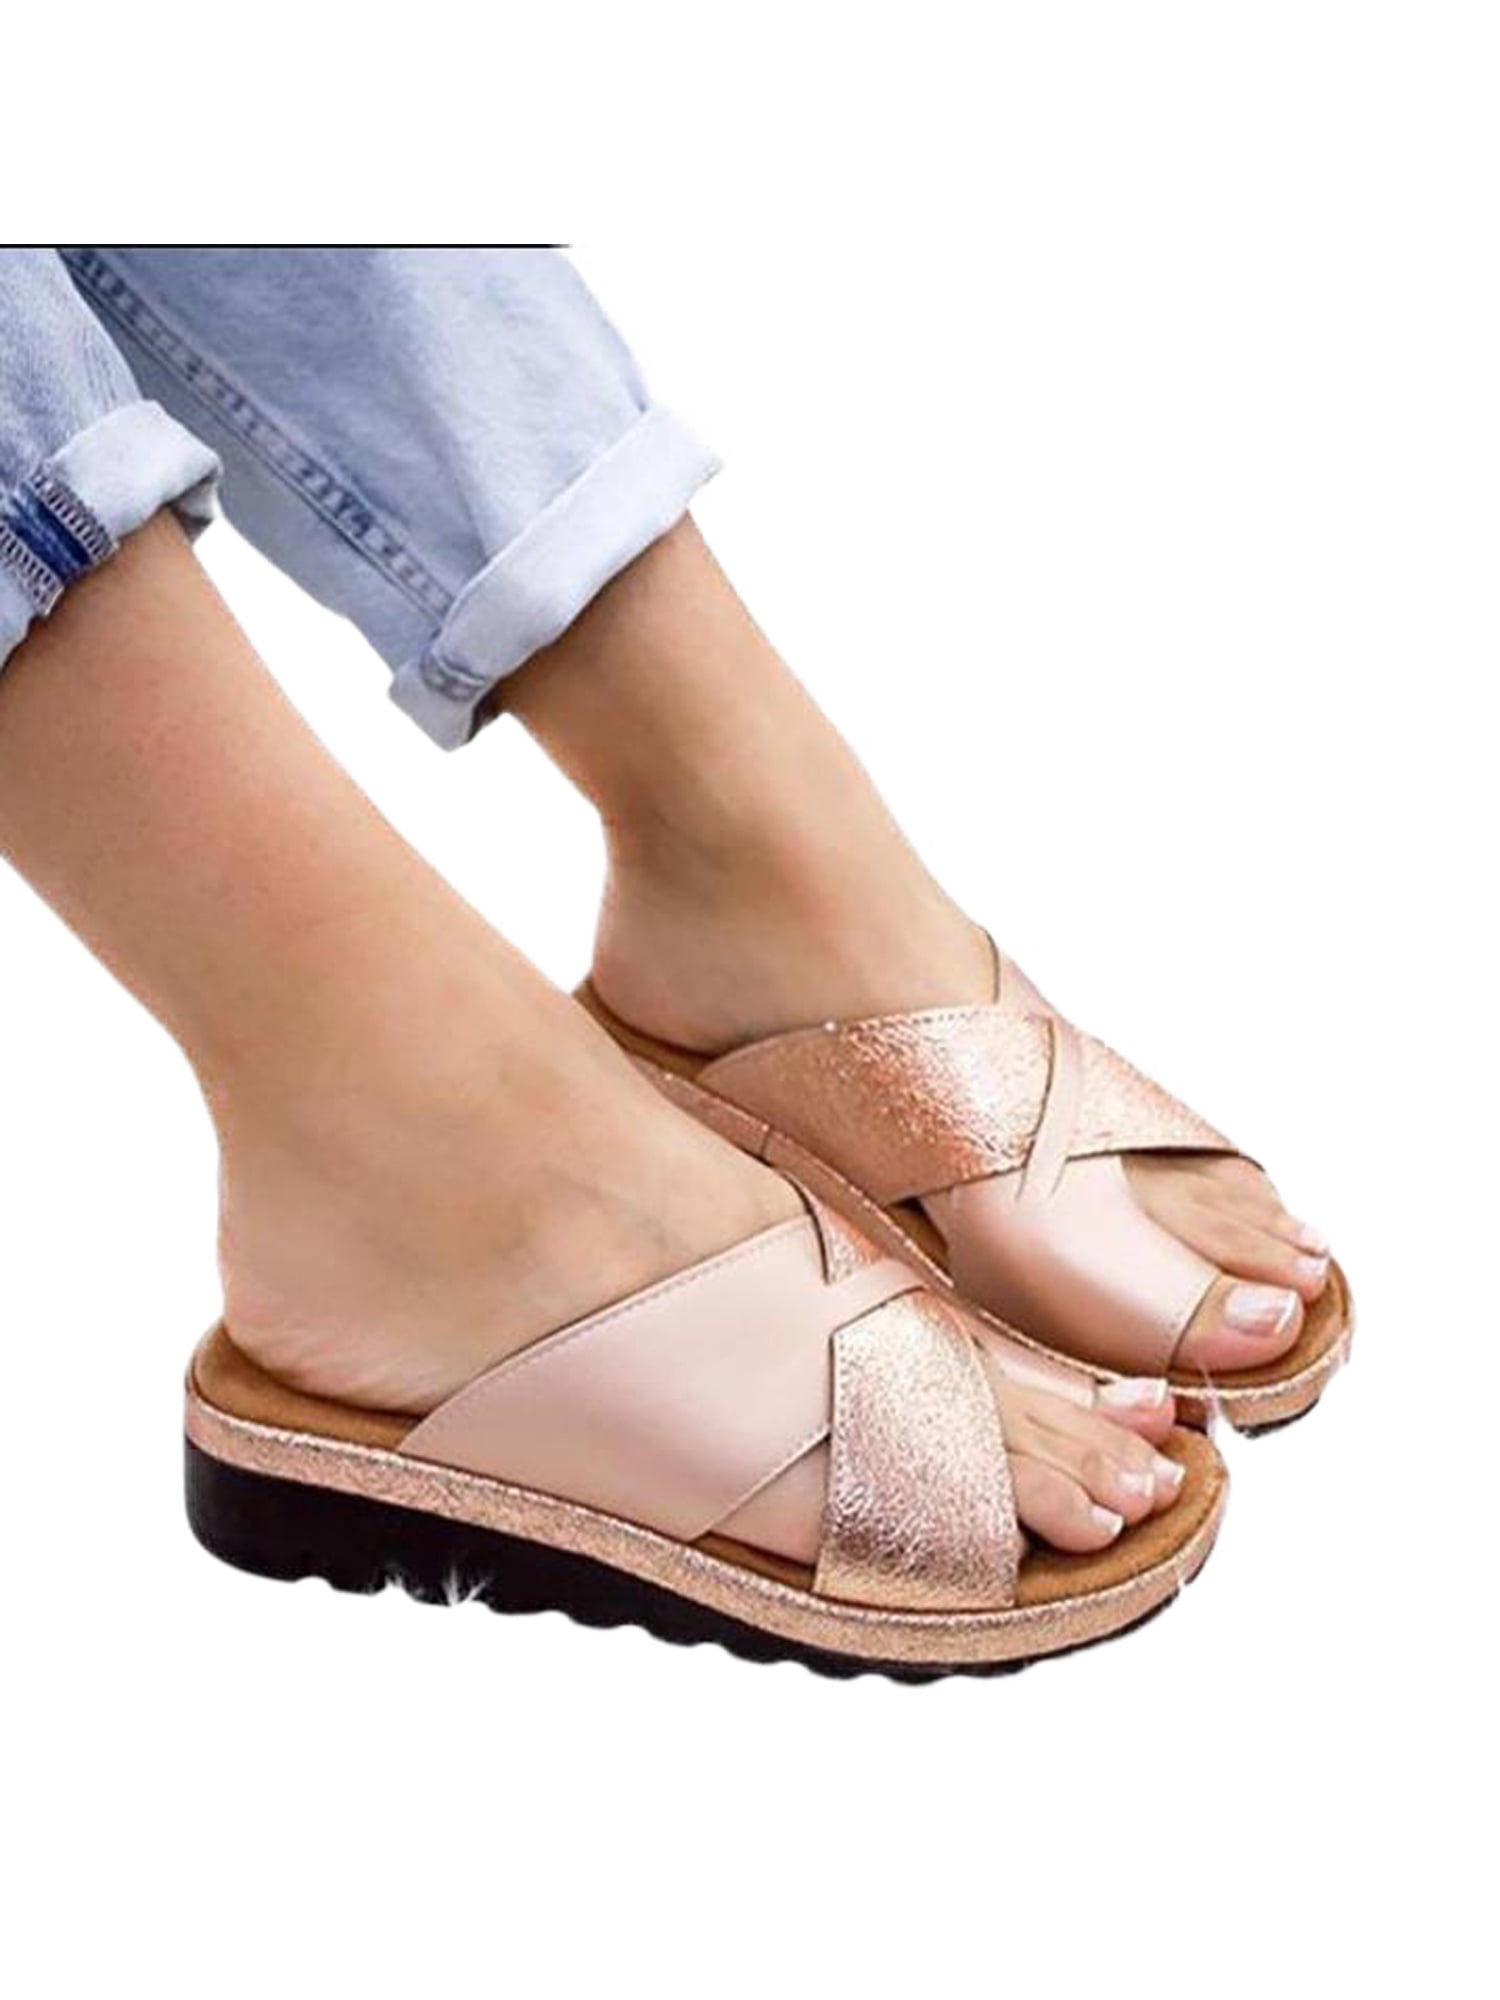 Women Comfy Toe Ring Wedge Sandal Shoes Ladies Bunion Corrector Mules Shoes Size